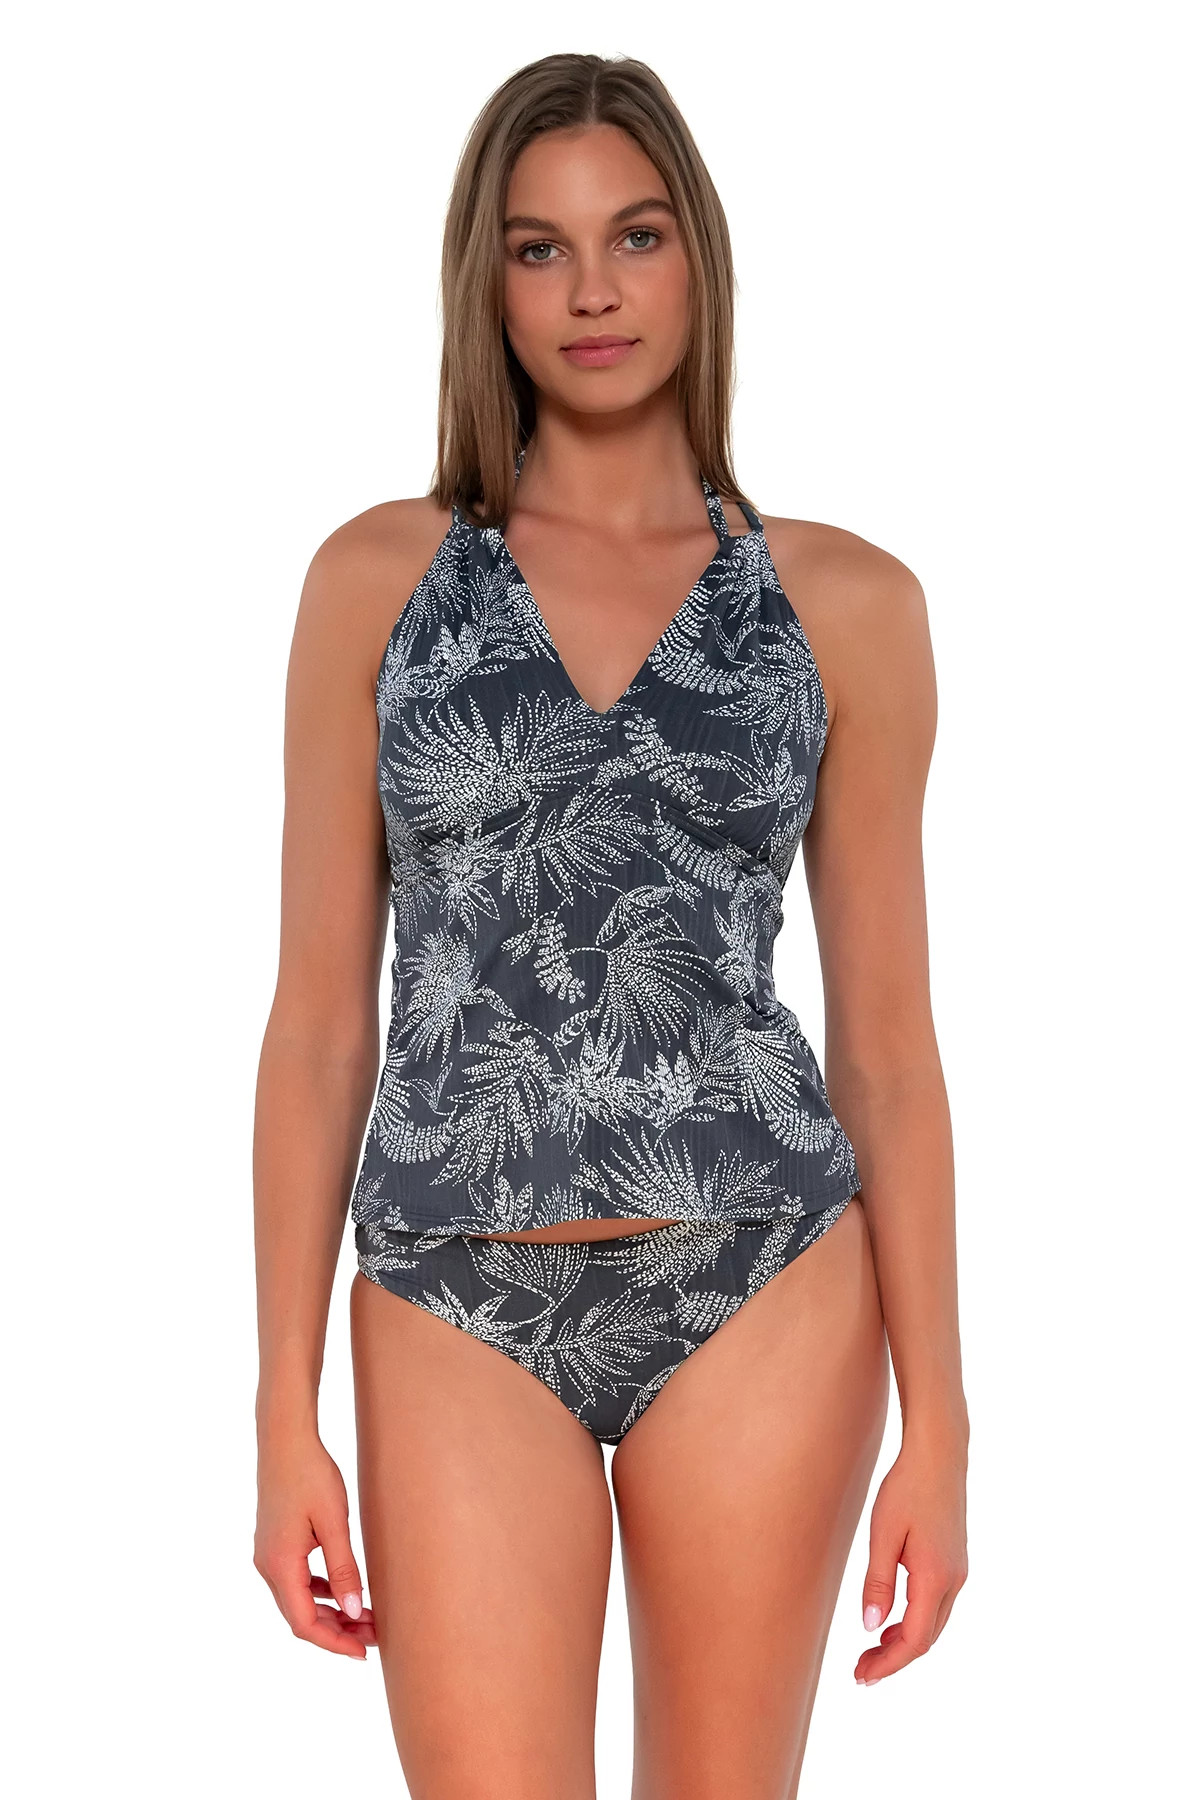 FANFARE SEAGRASS TEXTURE Mia High Neck Tankini Top image number 2